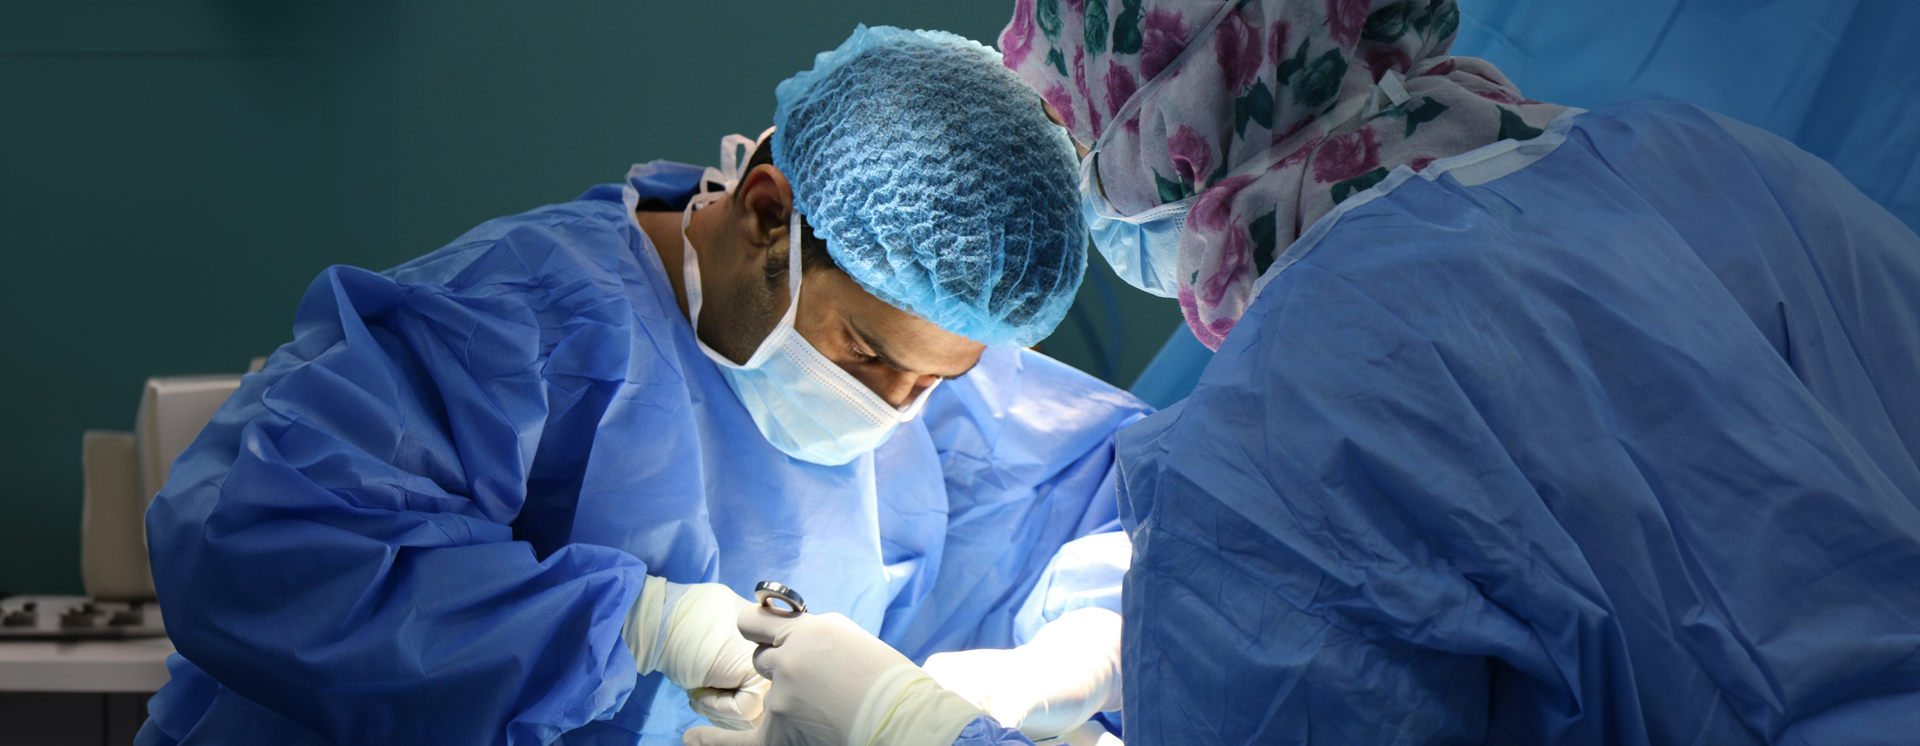 Surgeons wearing blue theatre gowns, gloves and skull caps performing an operation